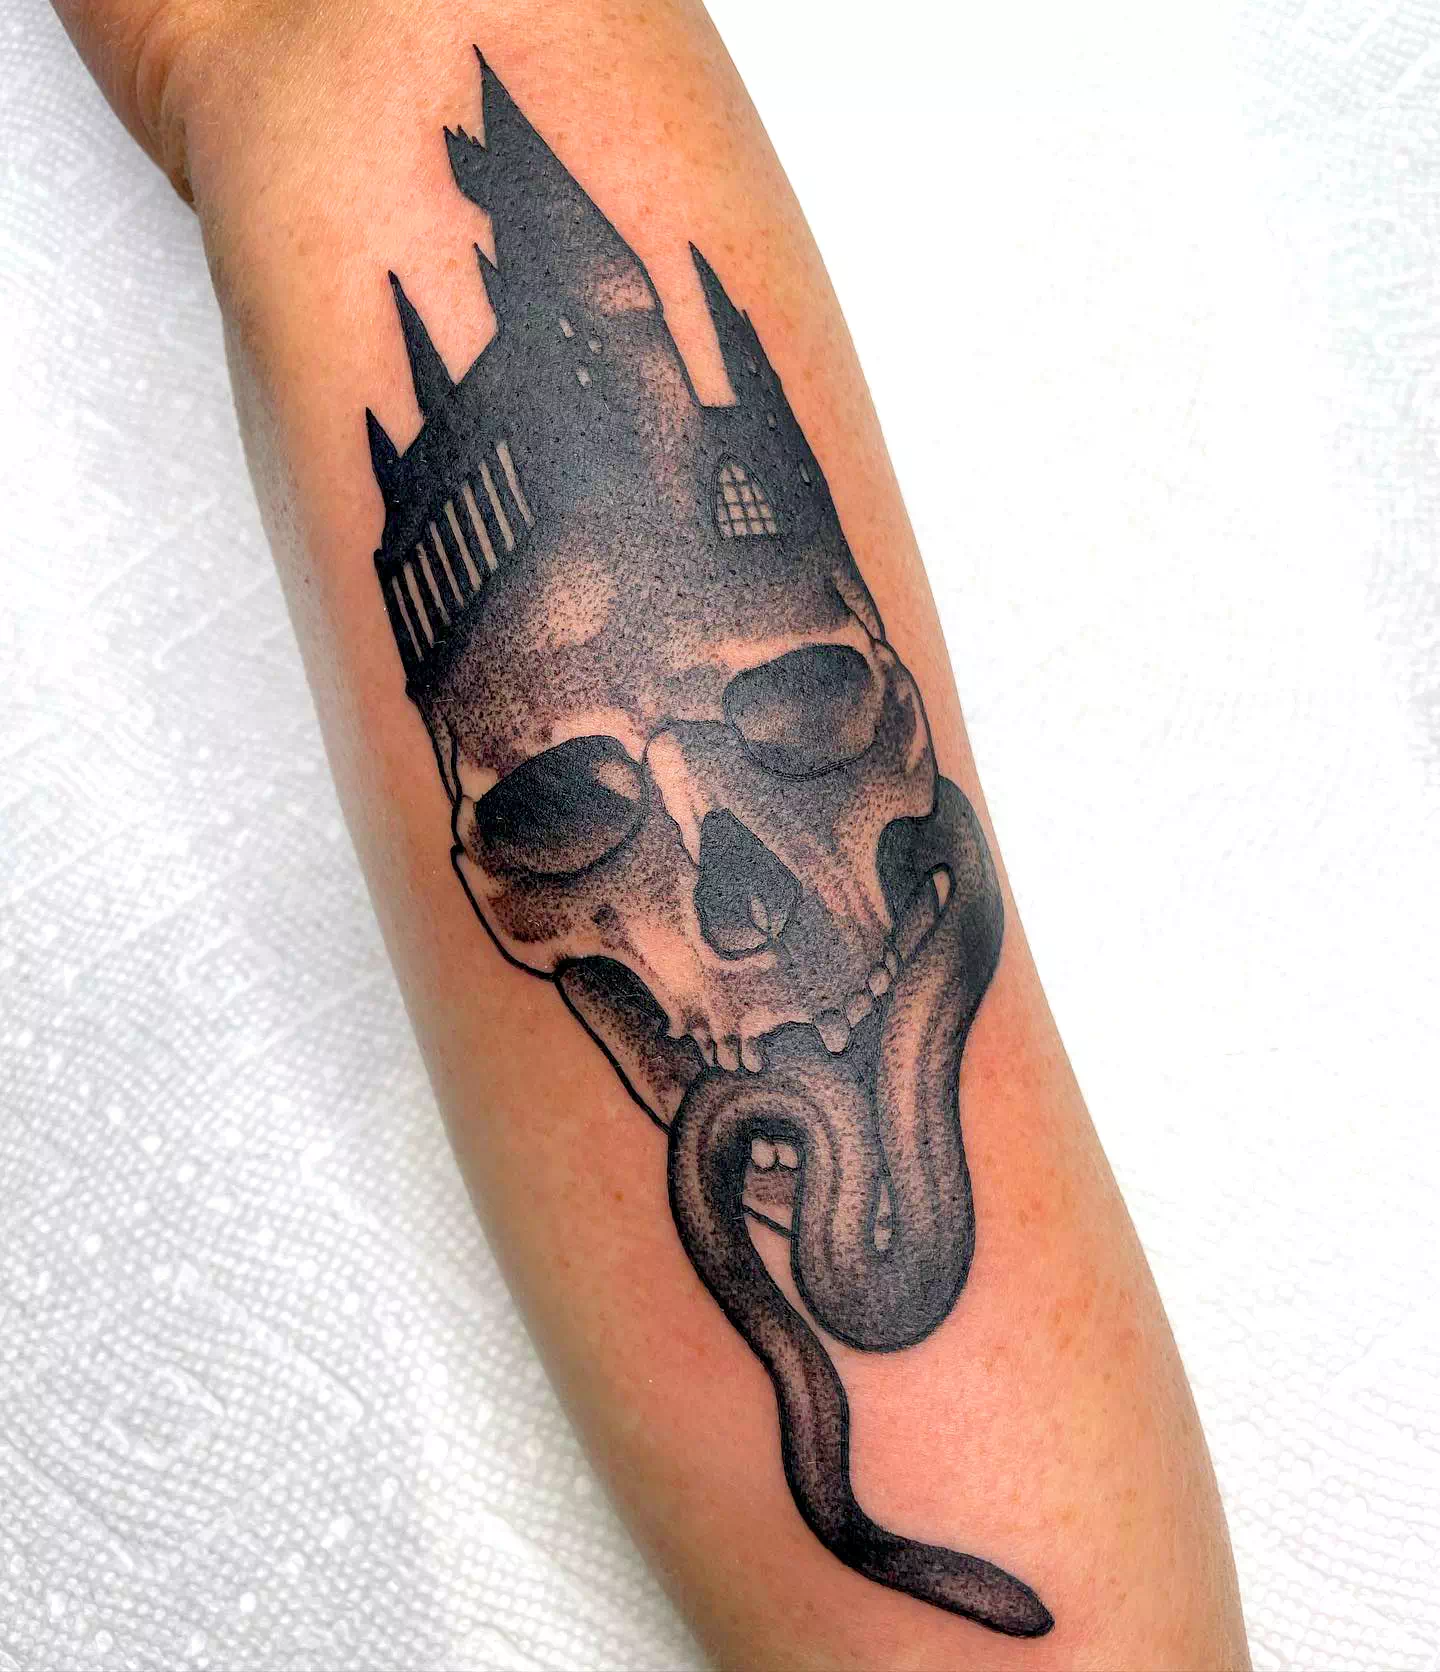 Scary Looking Death Eater Tattoo